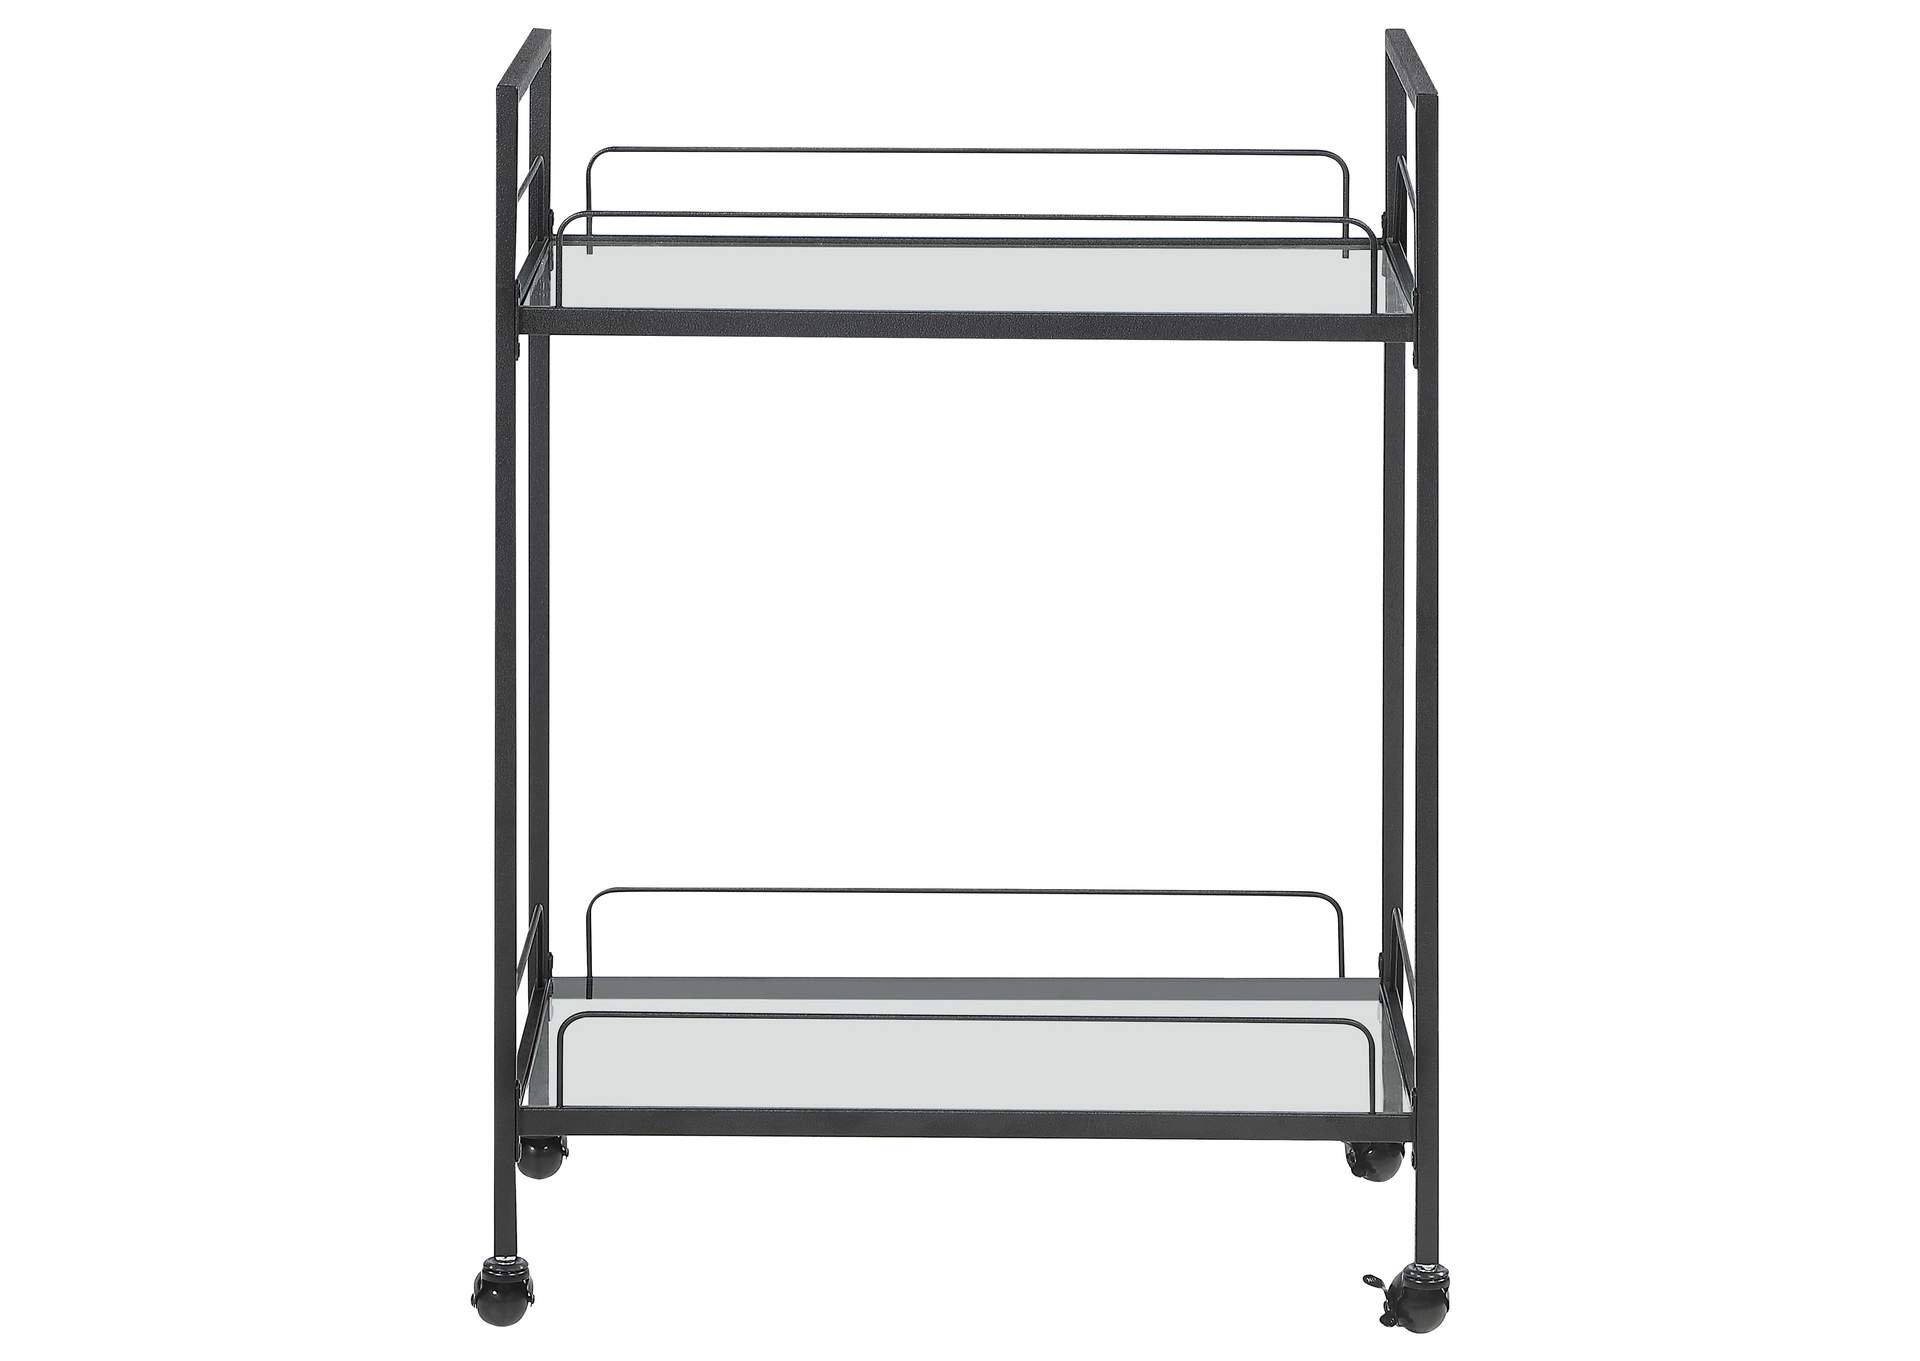 Curltis Serving Cart with Glass Shelves Clear and Black,Coaster Furniture